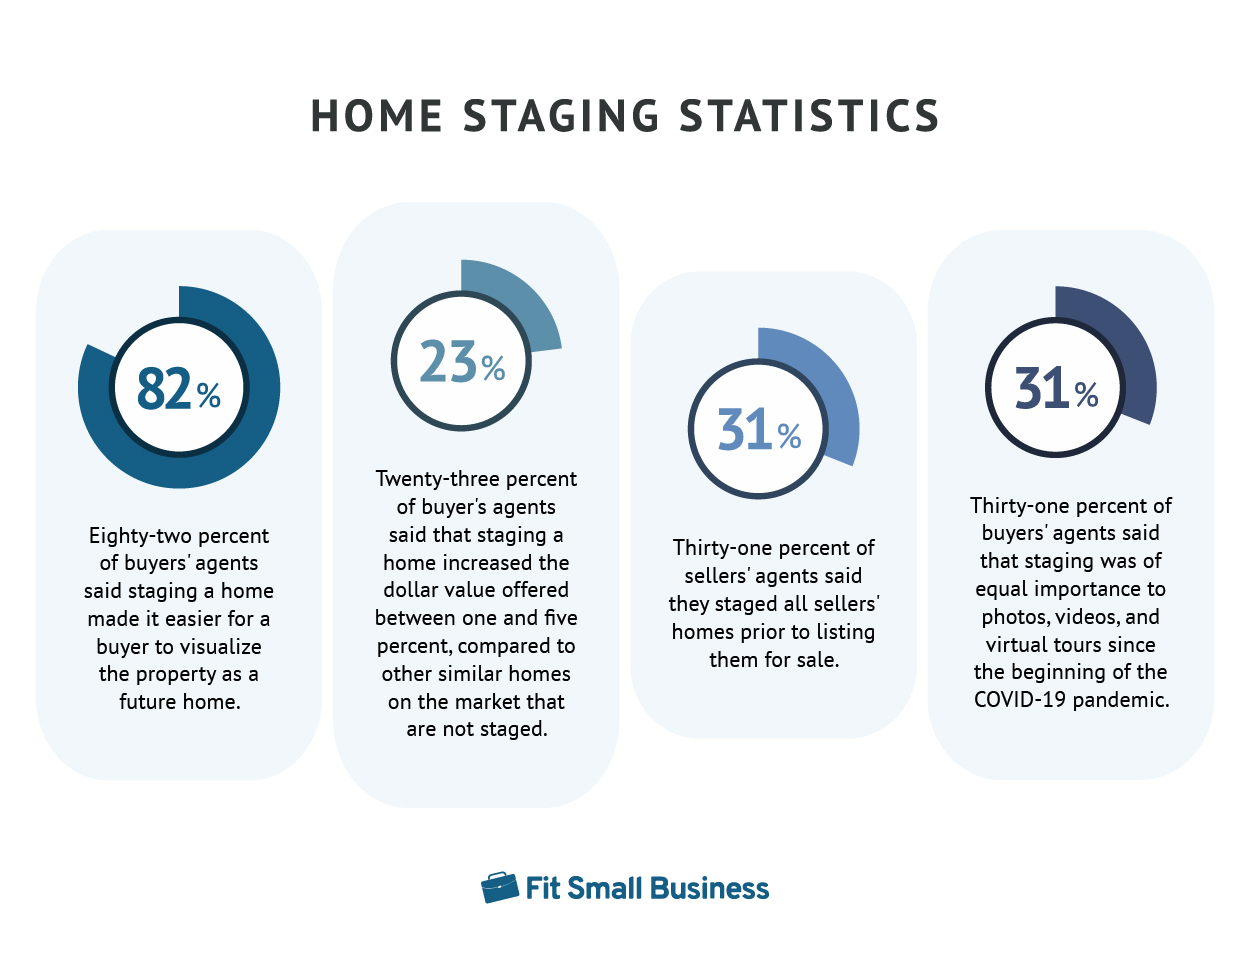 Graphs showcasing home staging statistics with text about the statistics below each graph